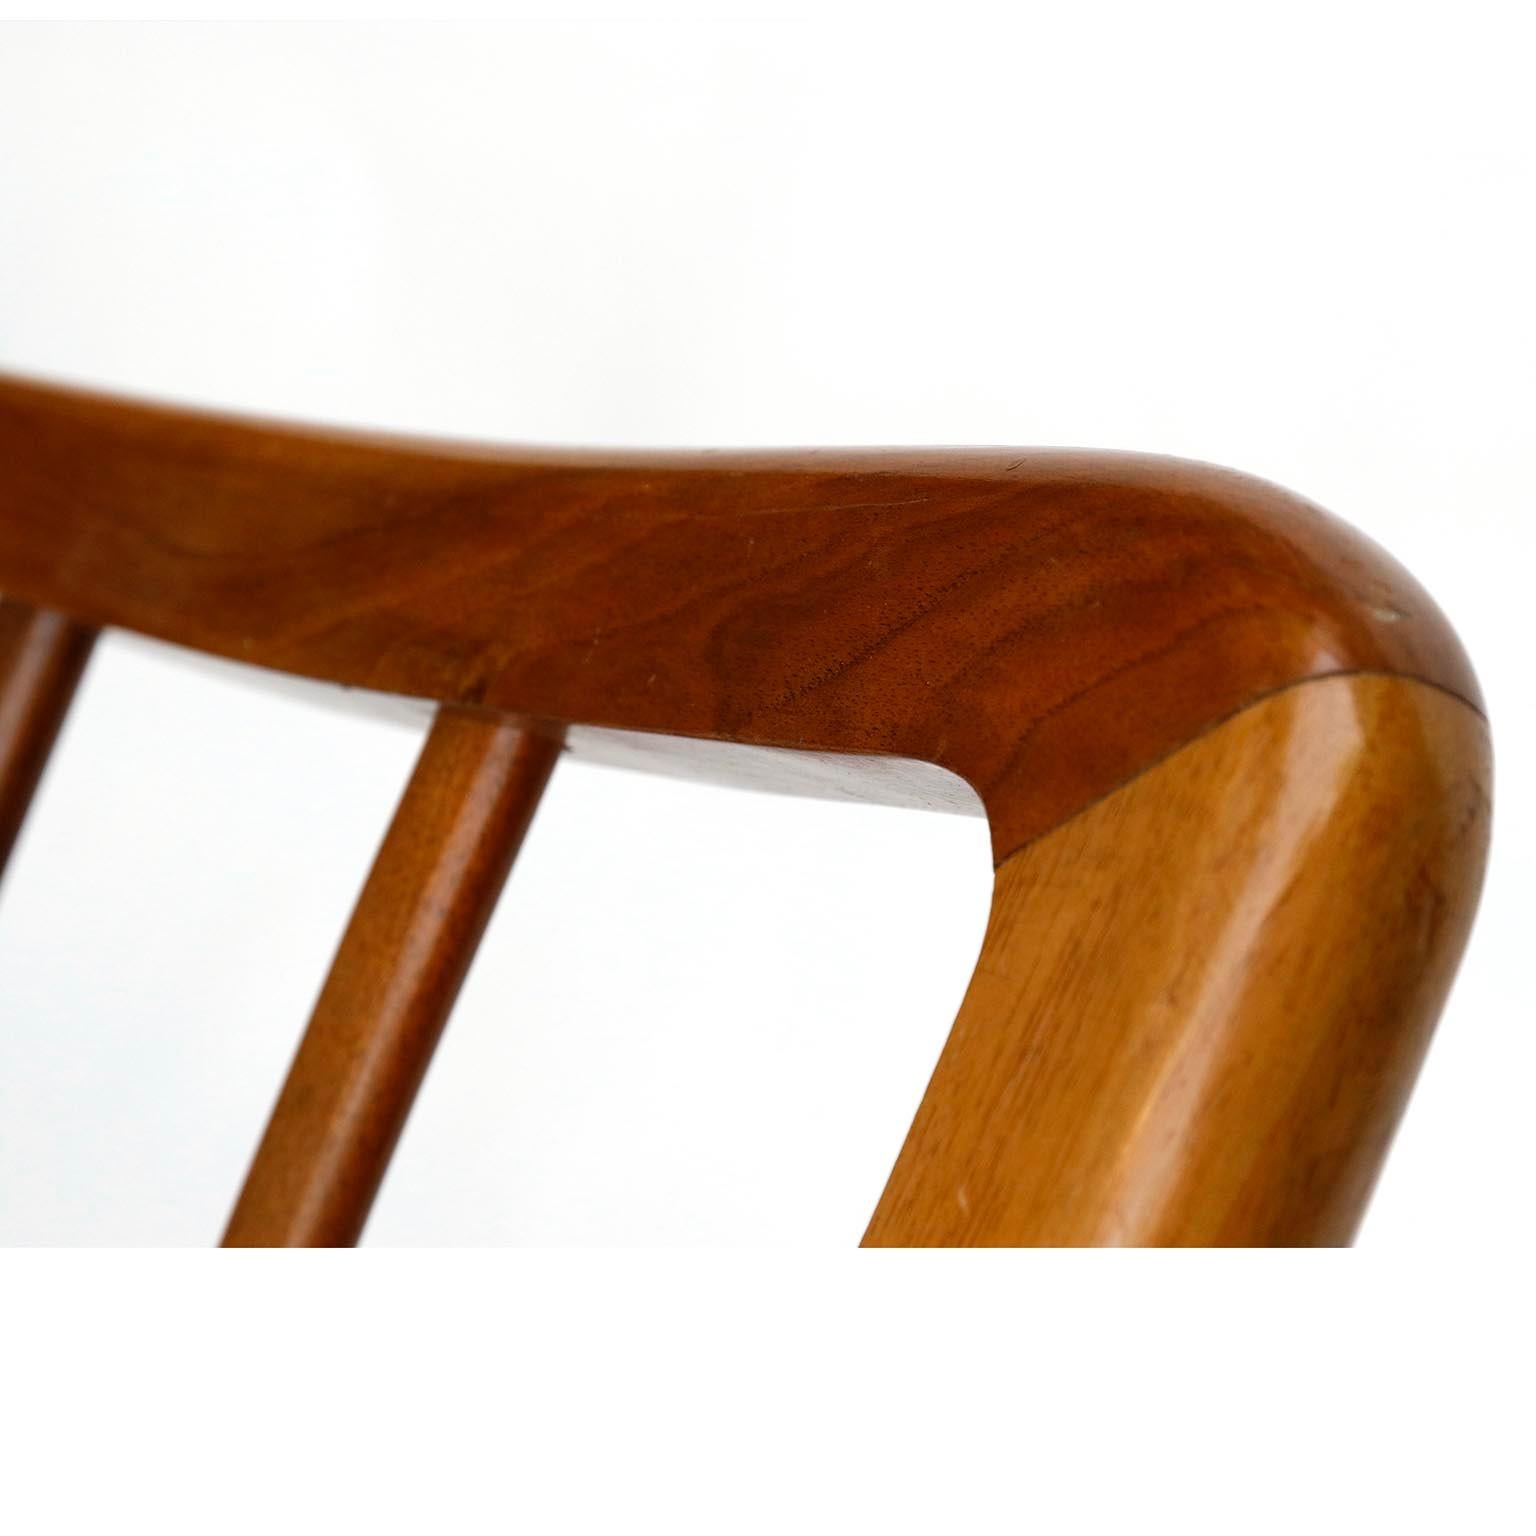 Seette Bench Seat Attributed to Josef Frank, Walnut Wood, Thonet, 1940 4